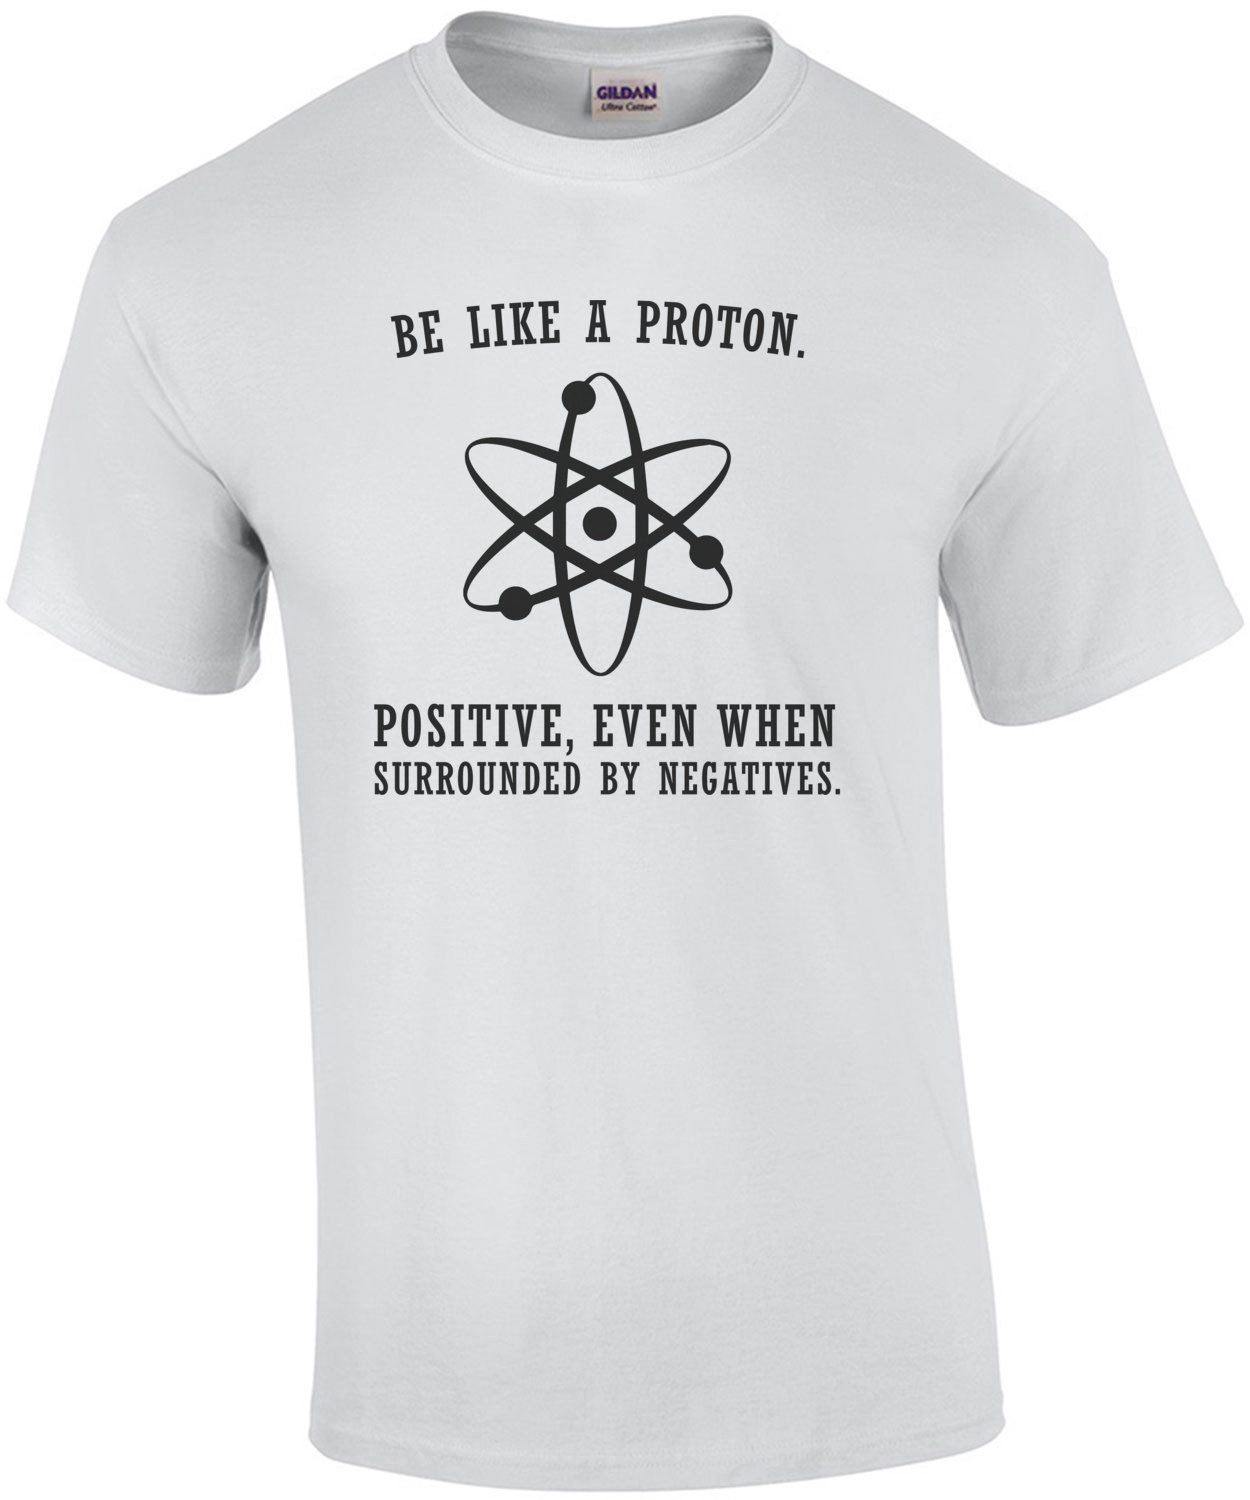 Be like a proton. Positive, even when surrounded by negatives. Funny T-Shirt